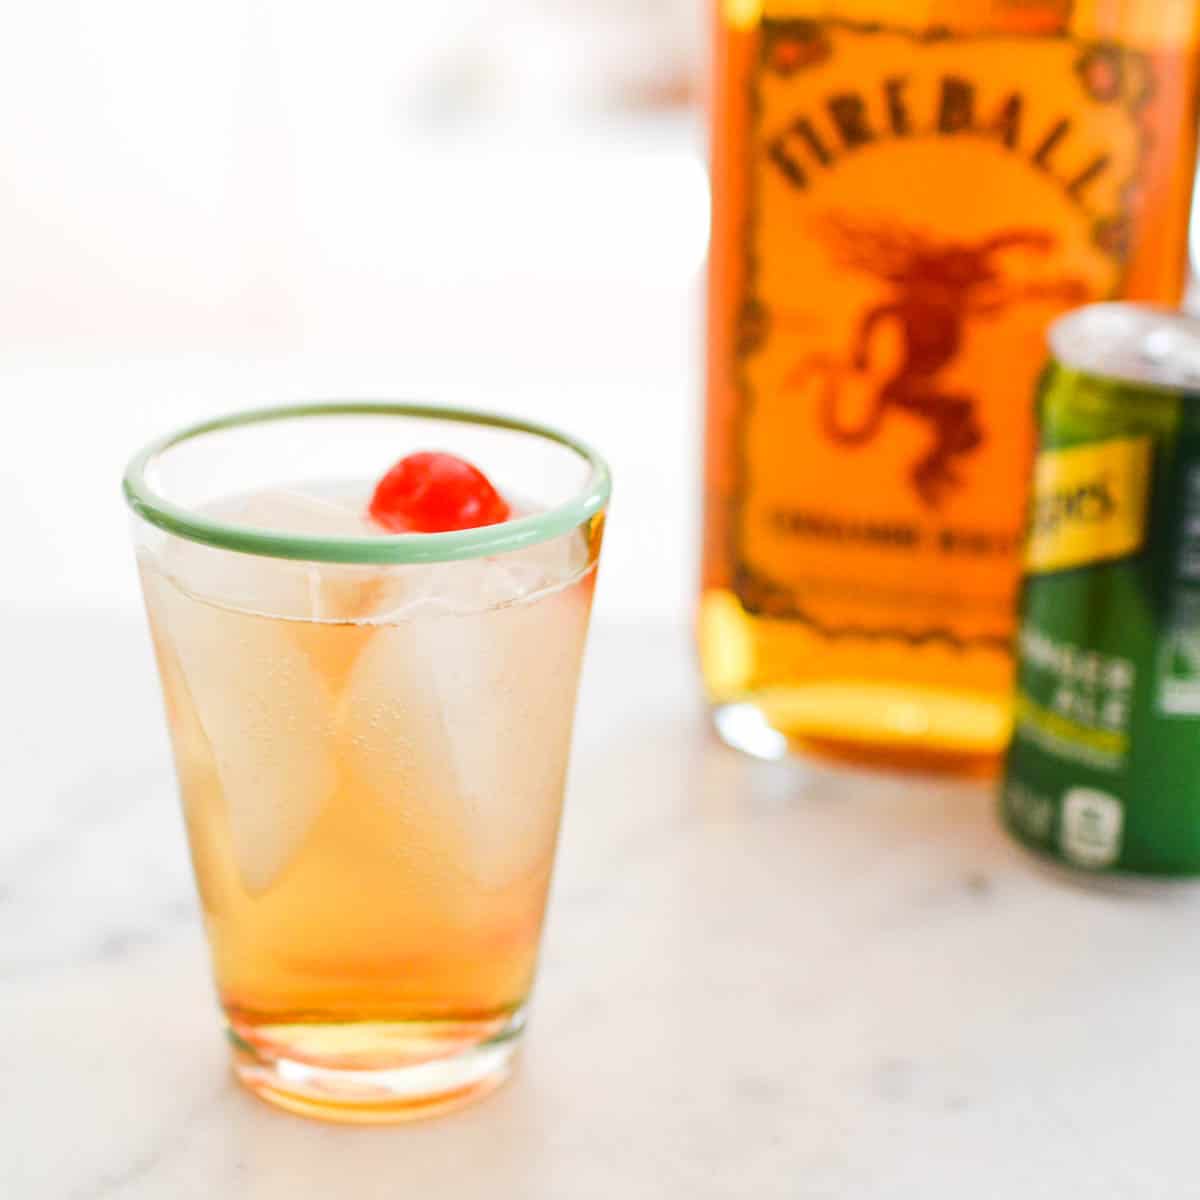 2-Ingredient Fireball Ginger Ale Cocktail Recipe